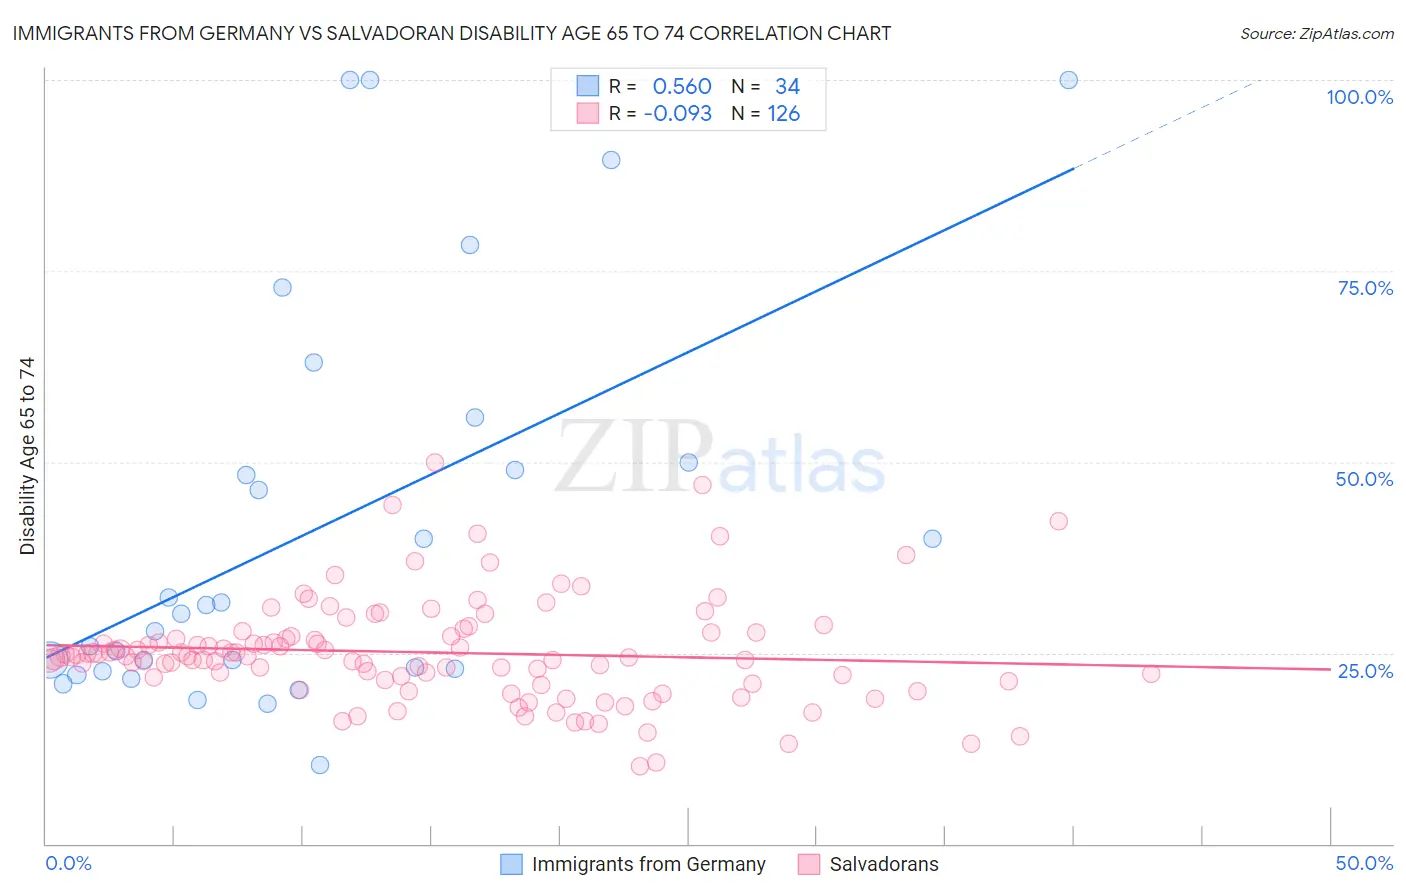 Immigrants from Germany vs Salvadoran Disability Age 65 to 74